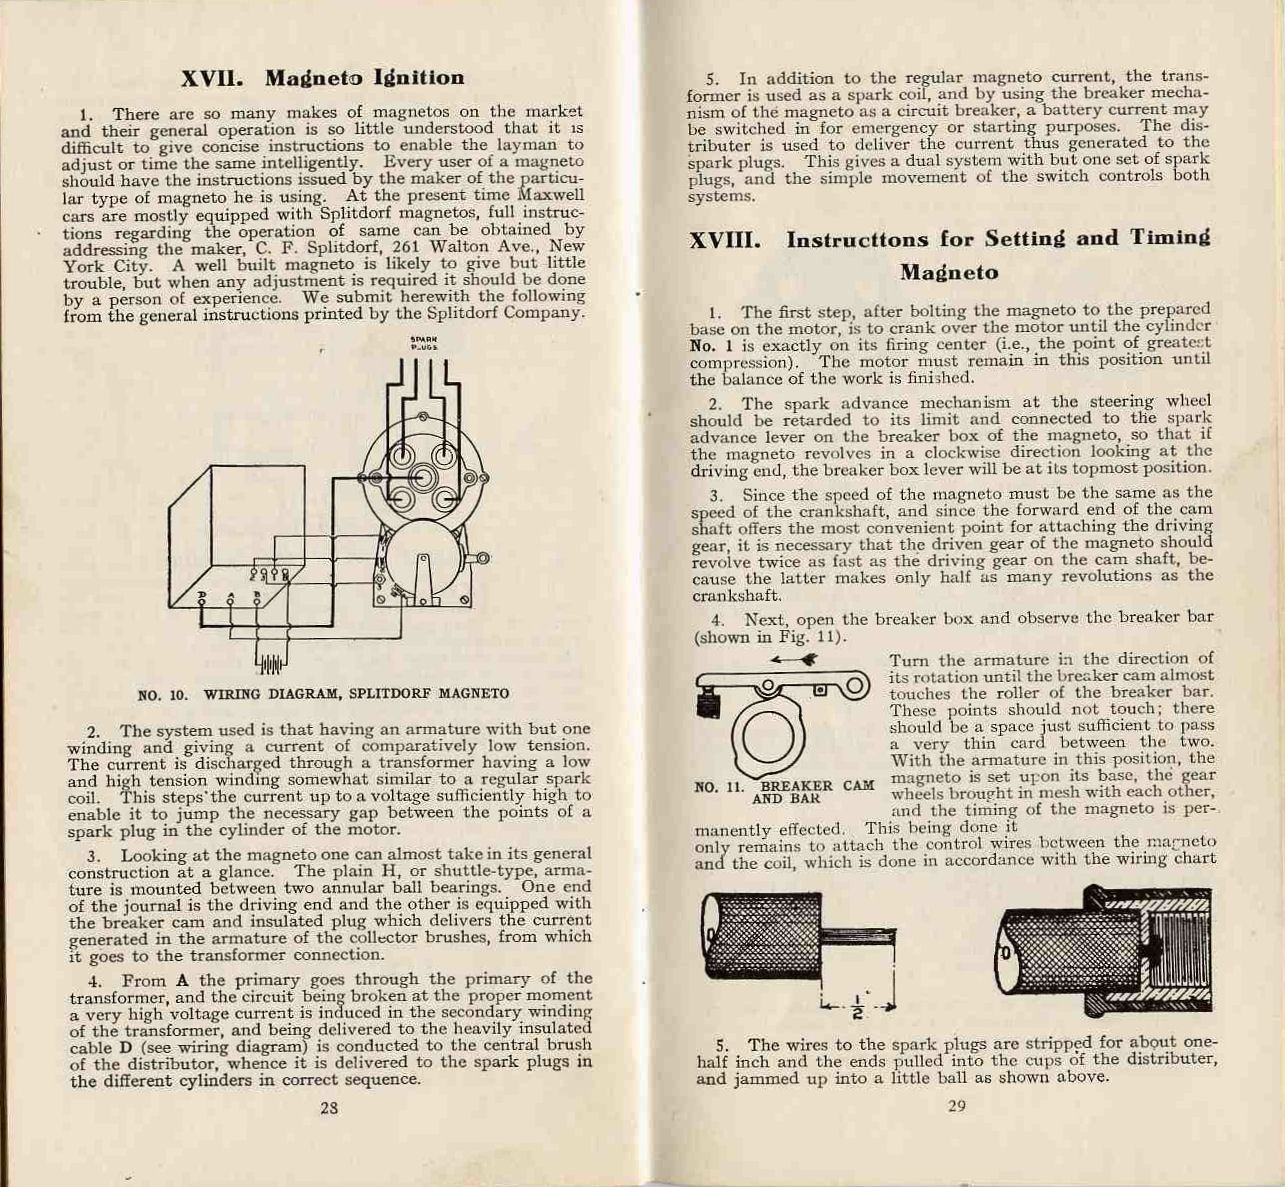 1909_Maxwell_Instructions-28-29